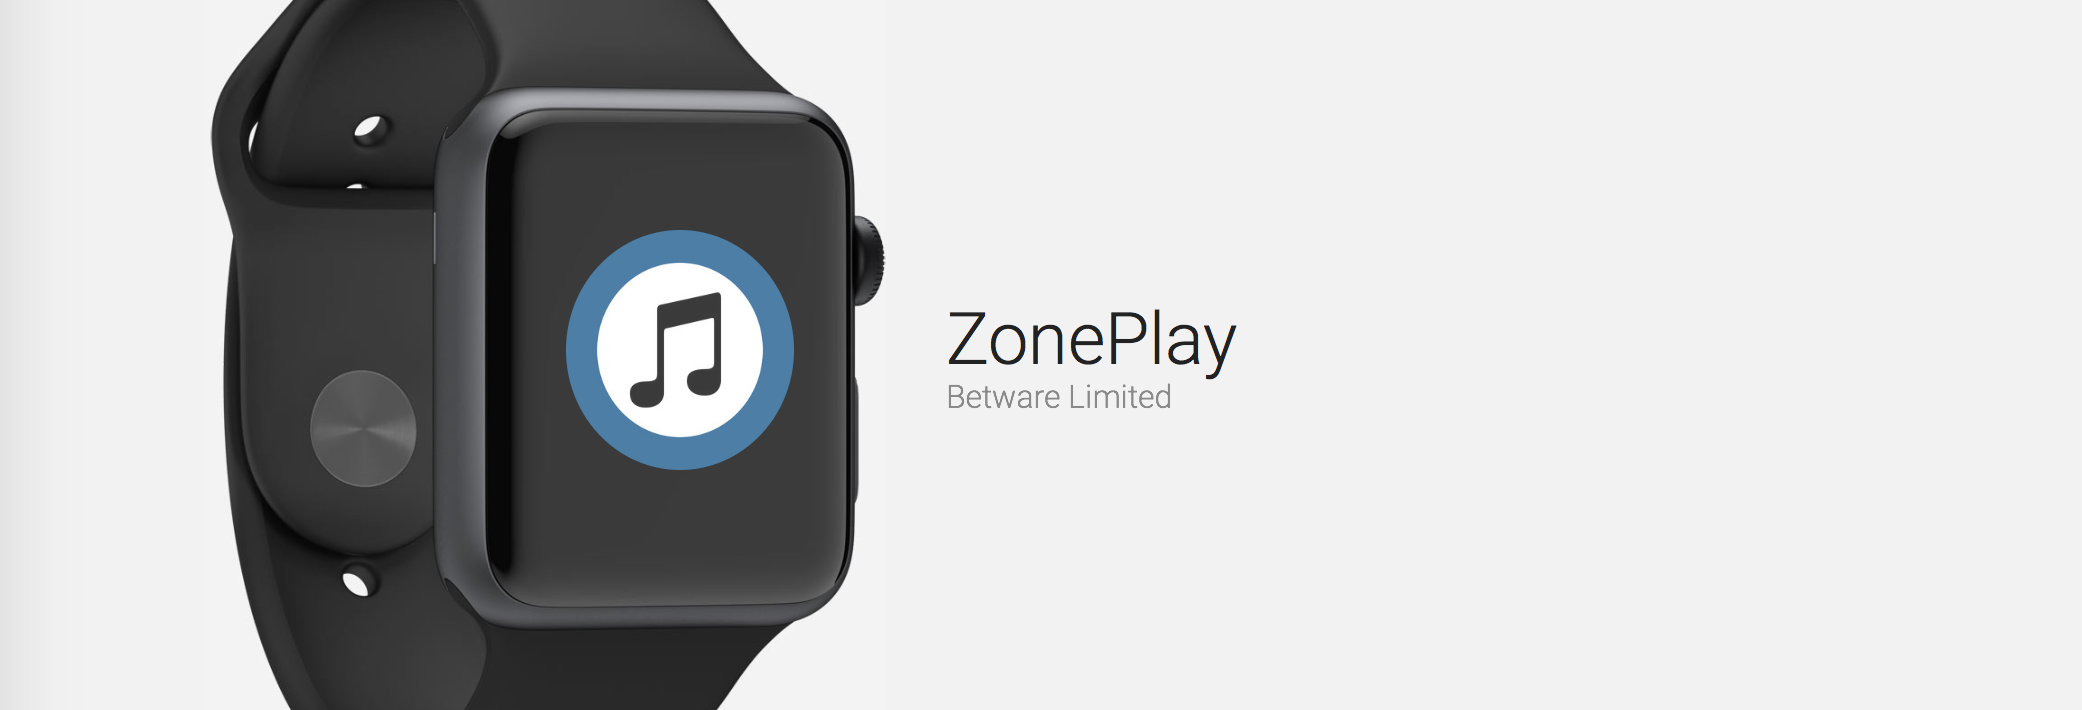 Give your Sonos system a boost with ZonePlay for Apple Watch